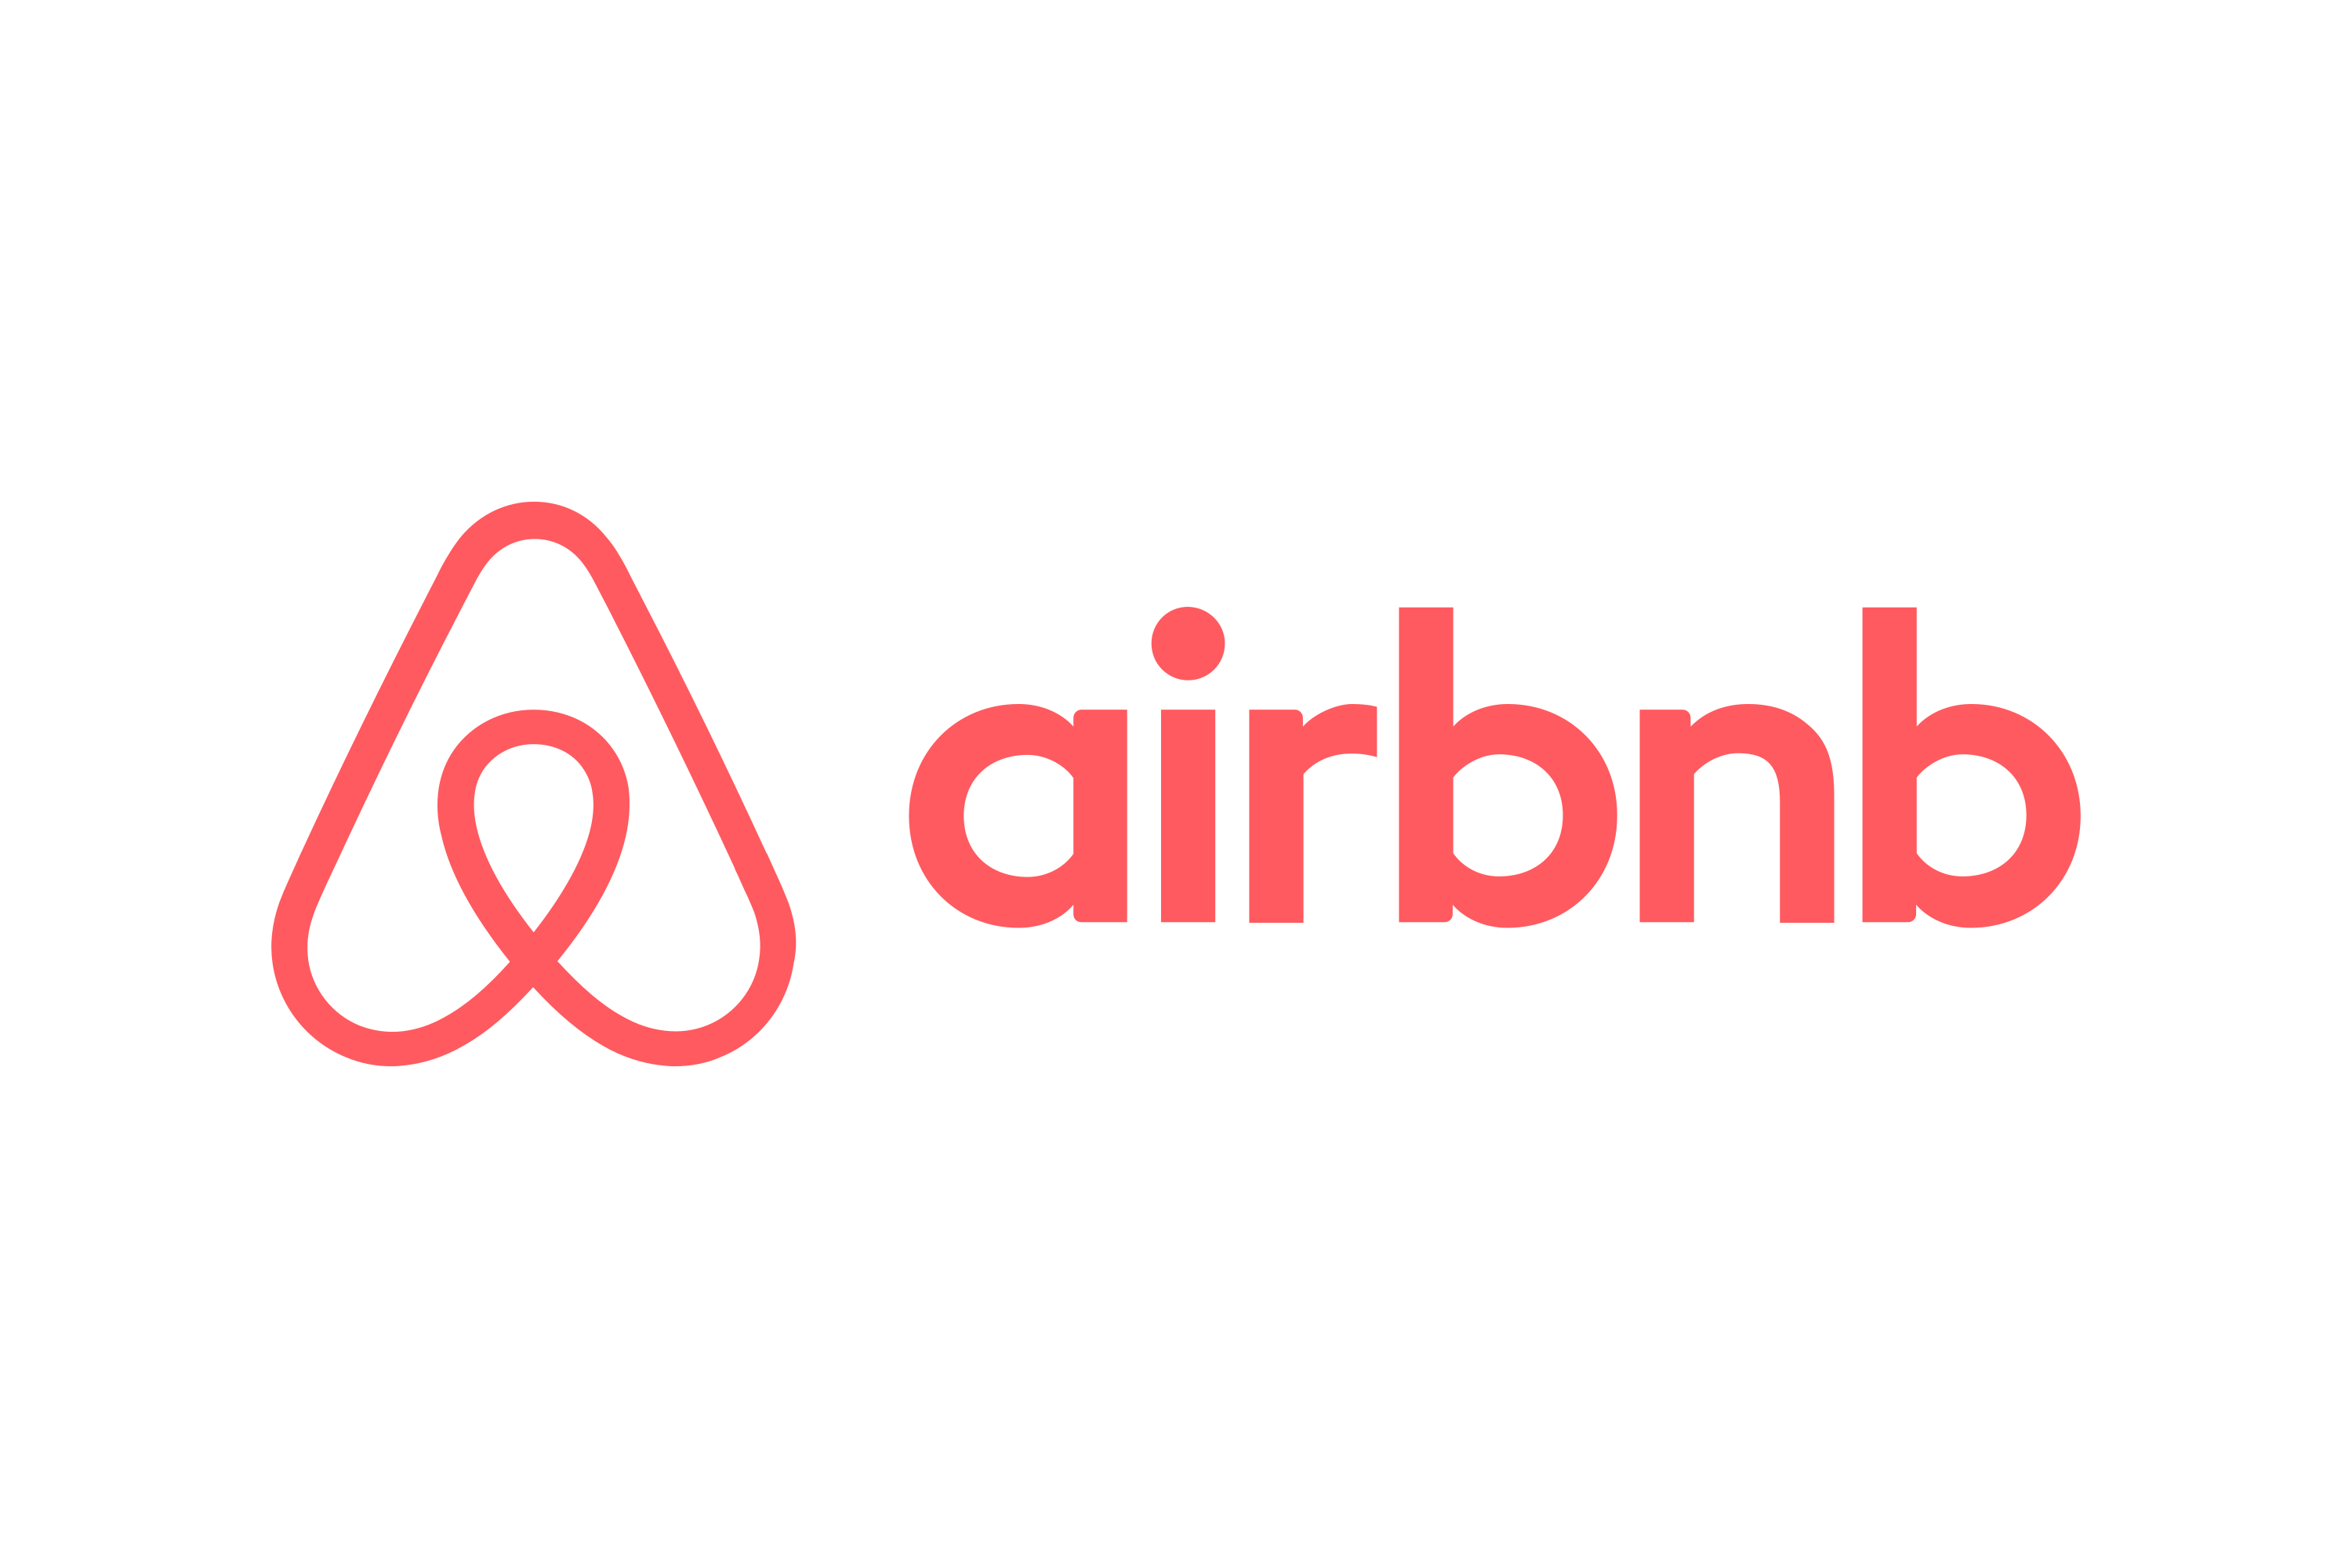 Download Airbnb  Logo  in SVG Vector or PNG  File Format 